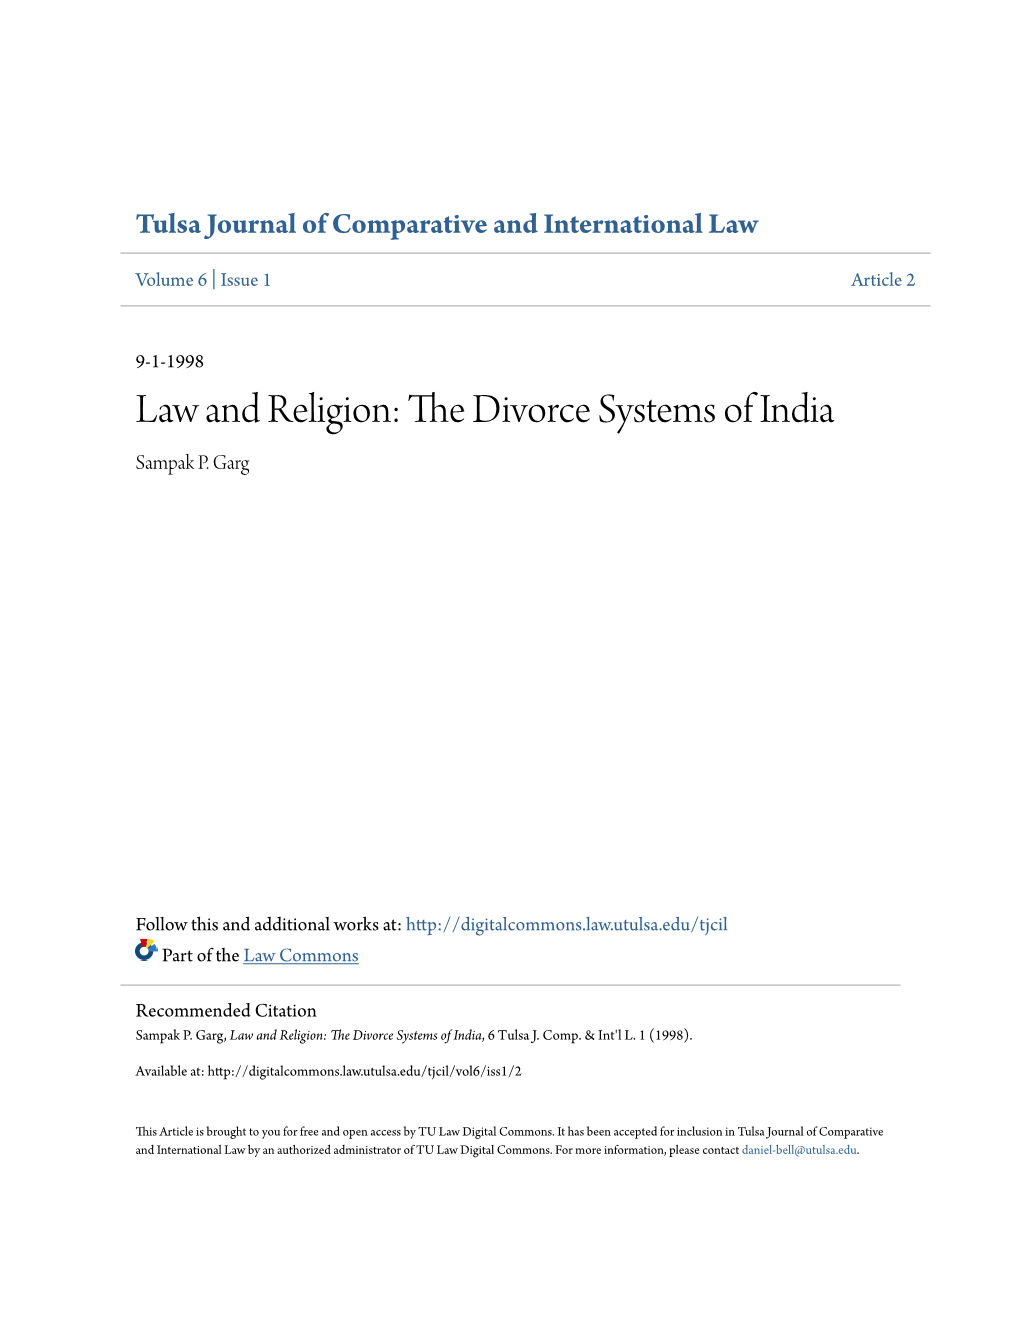 Law and Religion: the Divorce Systems of India Sampak P